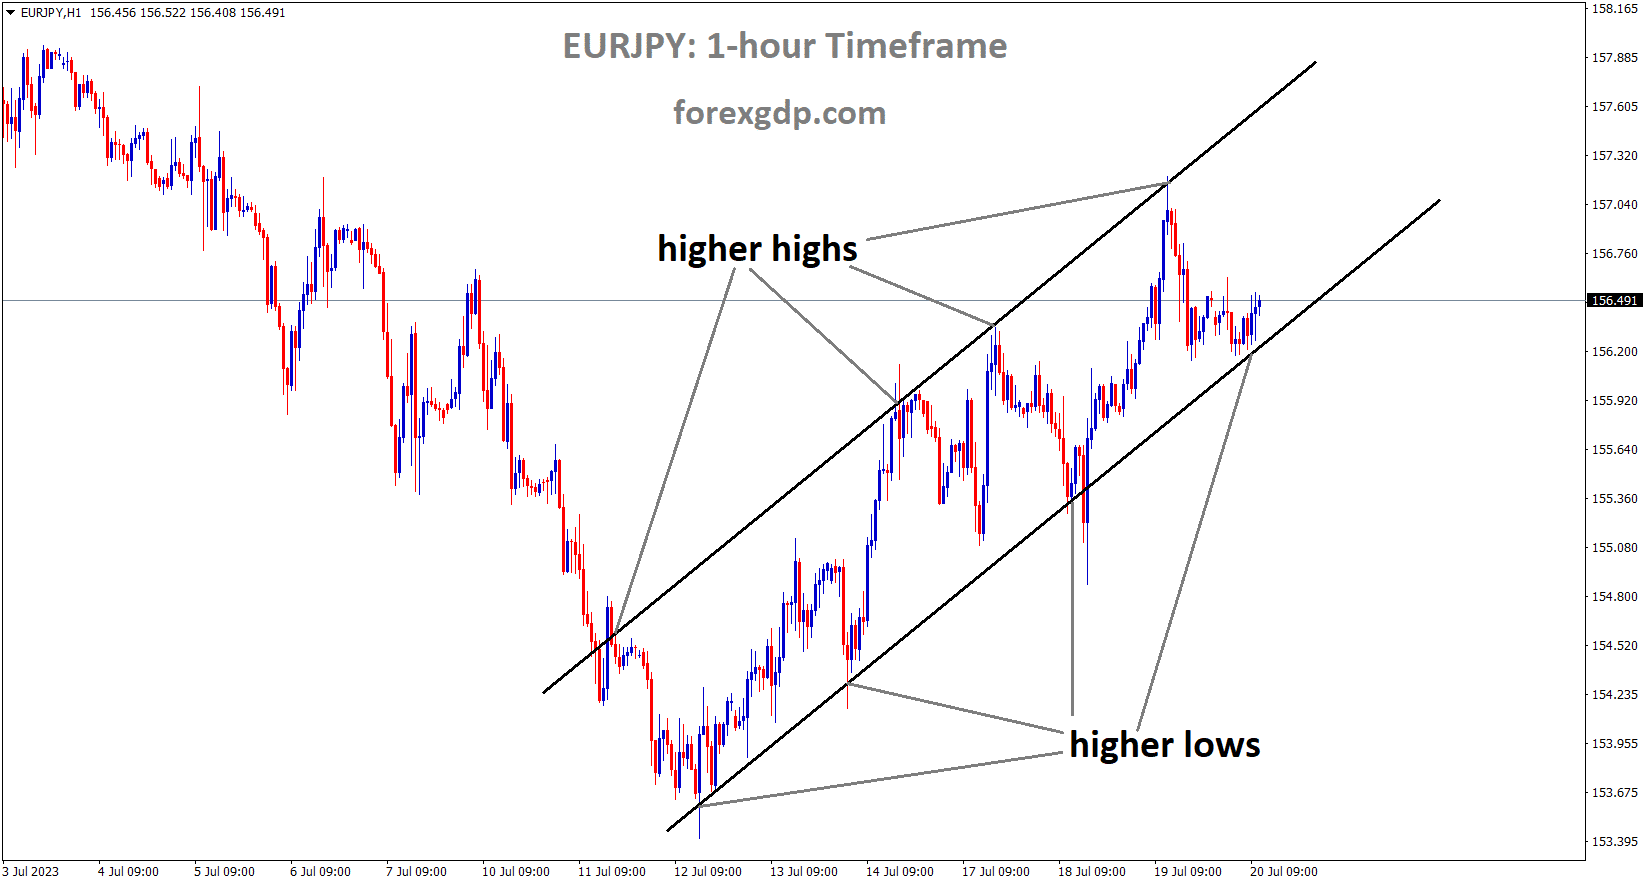 EURJPY is moving in an Ascending channel and the market has rebounded from the higher low area of the channel.